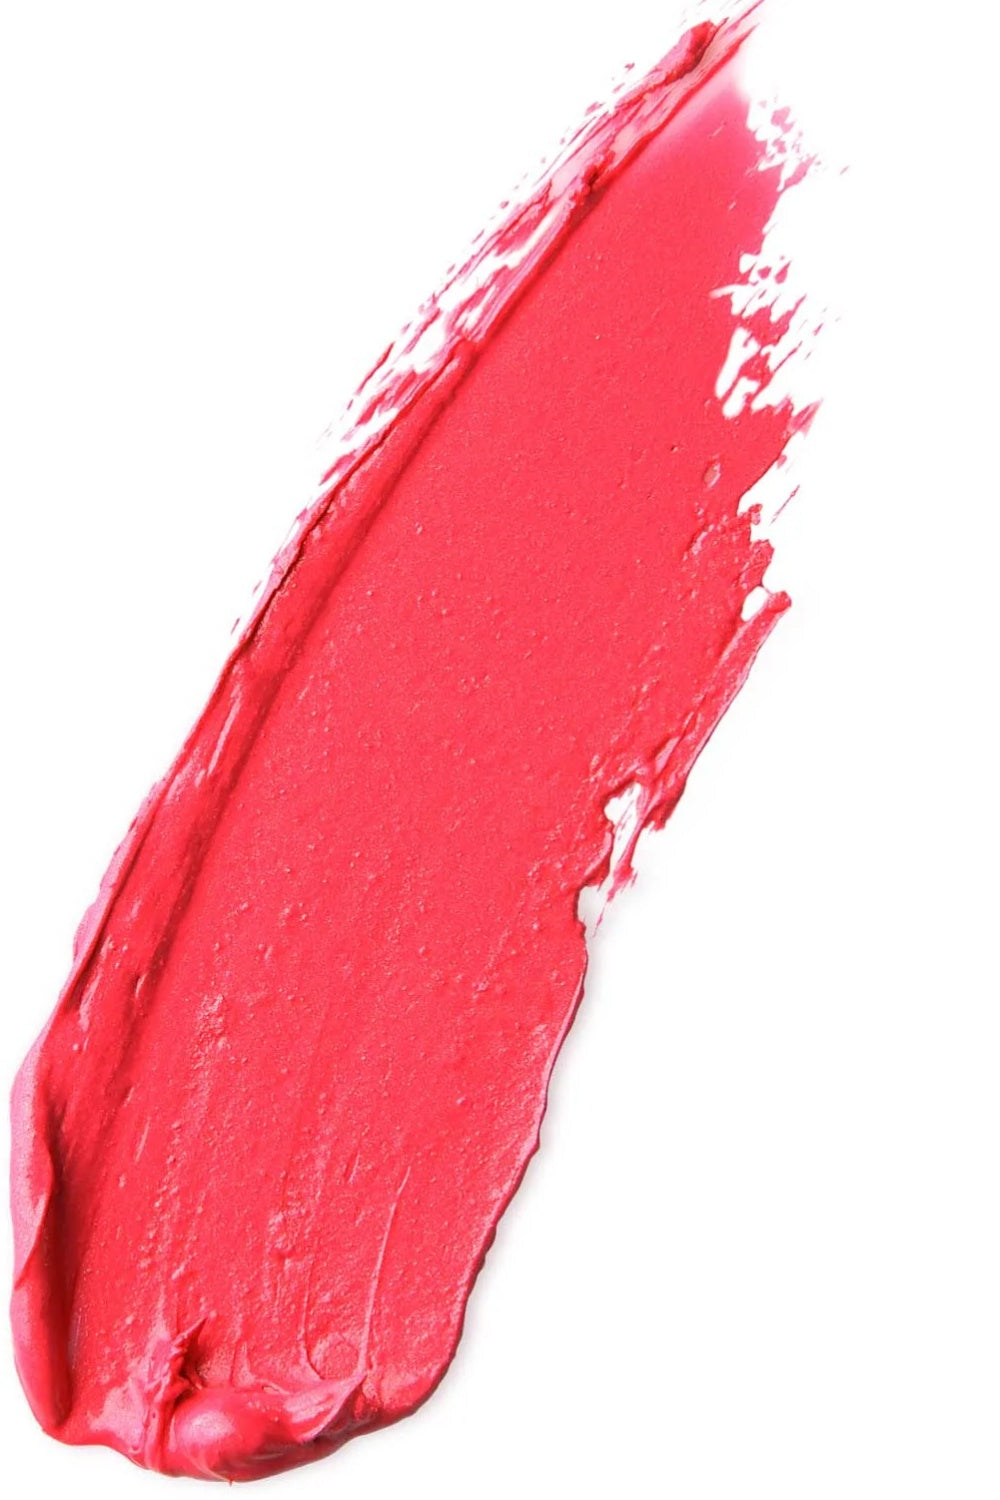 ANTIPODES MOISTURE-BOOST NATURAL LIPSTICK SOUTH PACIFIC CORAL